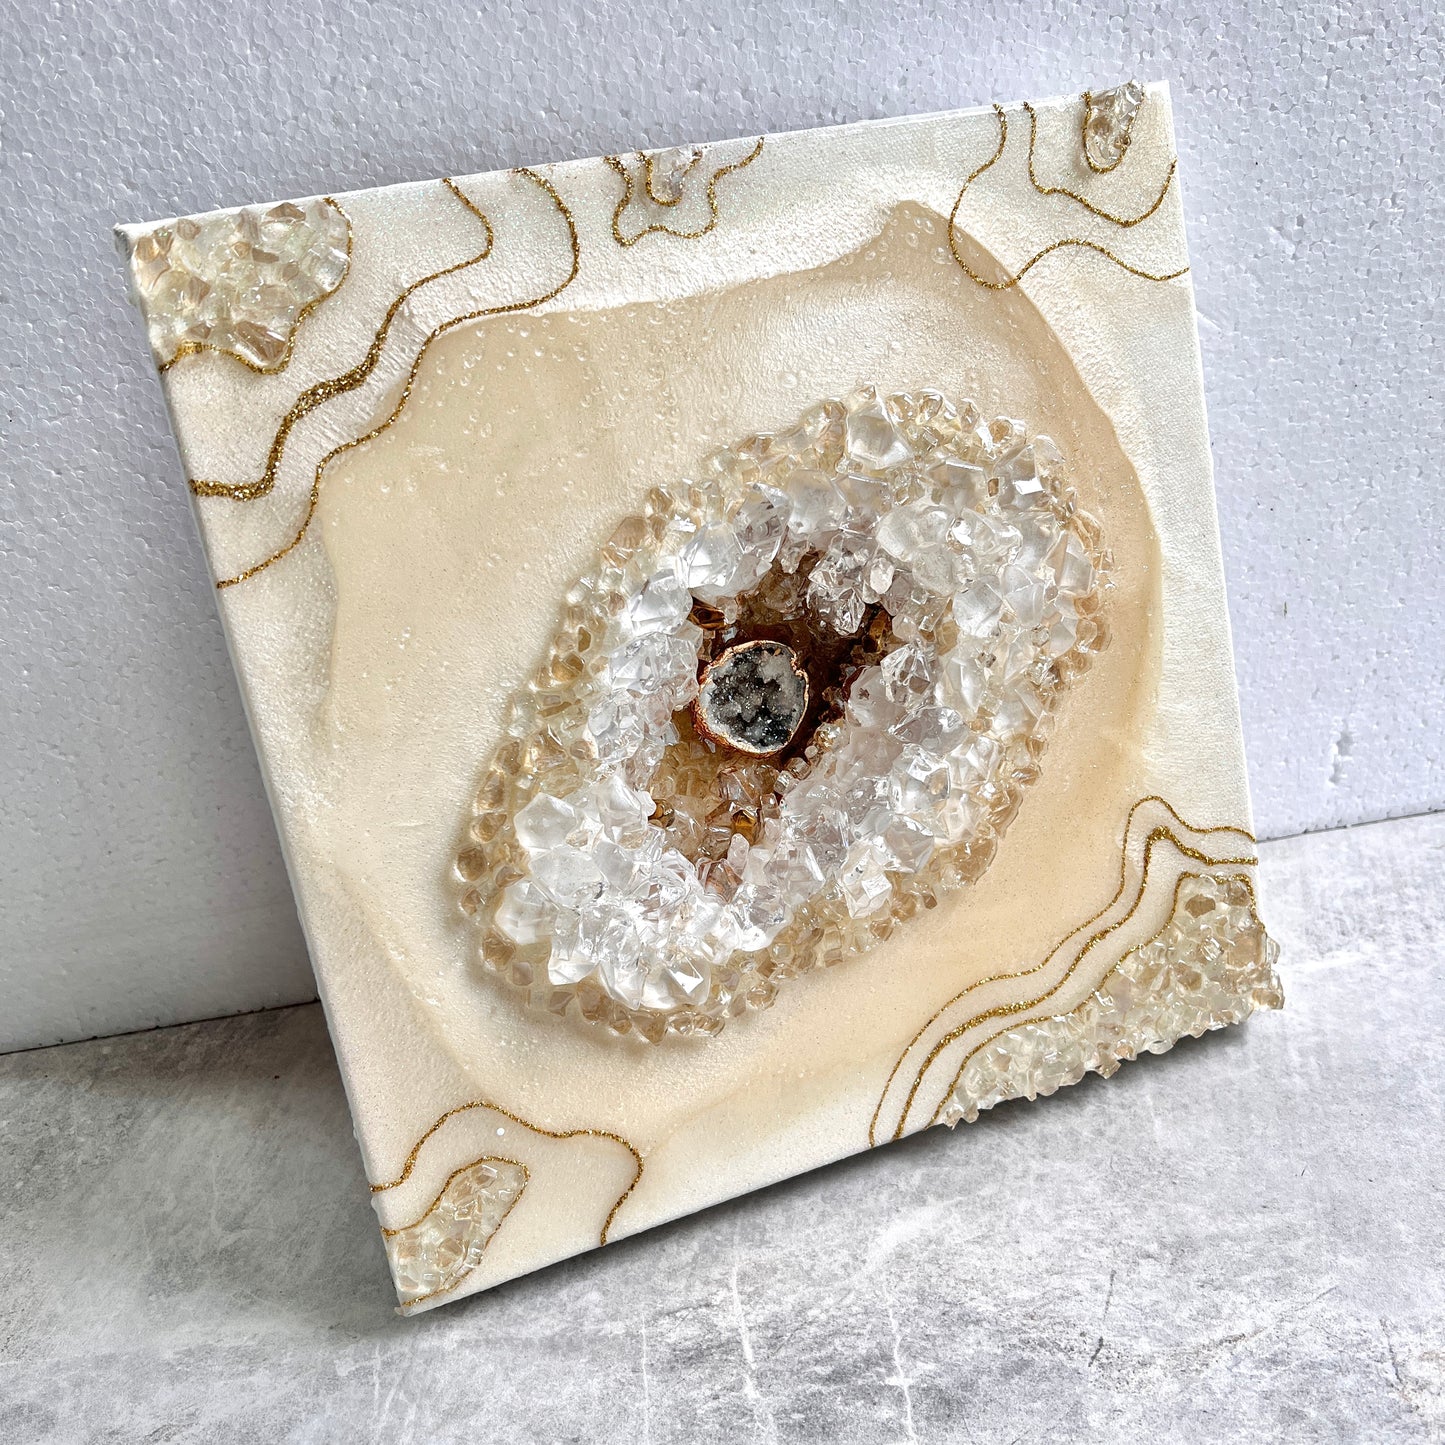 3 Dimensional Geode Artwork with Stand